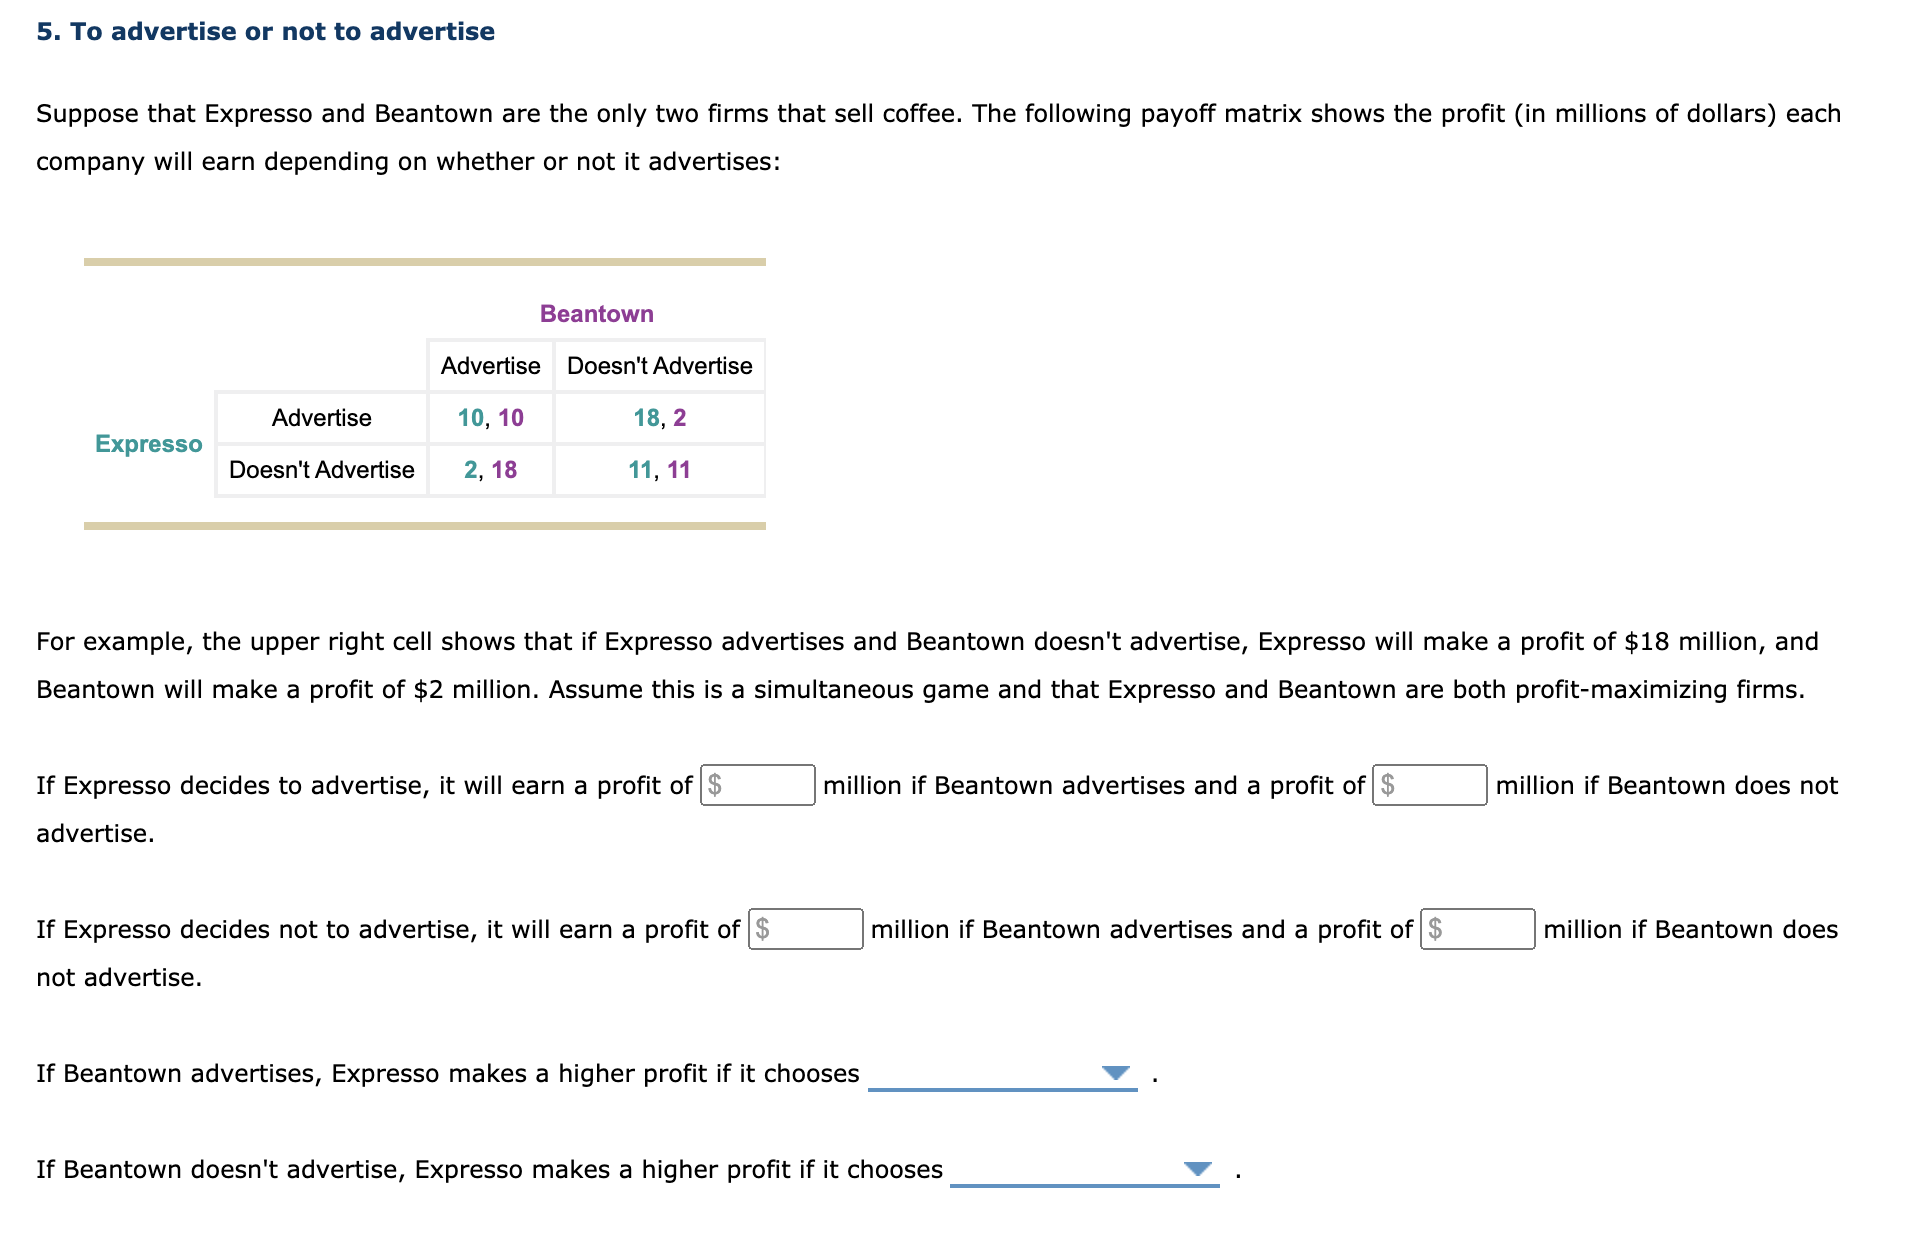 Suppose that Expresso and Beantown are the only two firms that sell coffee. The following payoff matrix shows the profit (in millions of dollars) each
company will earn depending on whether or not it advertises:
Beantown
Advertise
Doesn't Advertise
Advertise
10, 10
18, 2
Expresso
Doesn't Advertise
2, 18
11, 11
For example, the upper right cell shows that if Expresso advertises and Beantown doesn't advertise, Expresso will make a profit of $18 million, and
Beantown will make a profit of $2 million. Assume this is a simultaneous game and that Expresso and Beantown are both profit-maximizing firms.
If Expresso decides to advertise, it will earn a profit of $
million if Beantown advertises and a profit of $
million if Beantown does not
advertise.
If Expresso decides not to advertise, it will earn a profit of $
million if Beantown advertises and a profit of $
million if Beantown does
not advertise.
If Beantown advertises, Expresso makes a higher profit if it chooses
